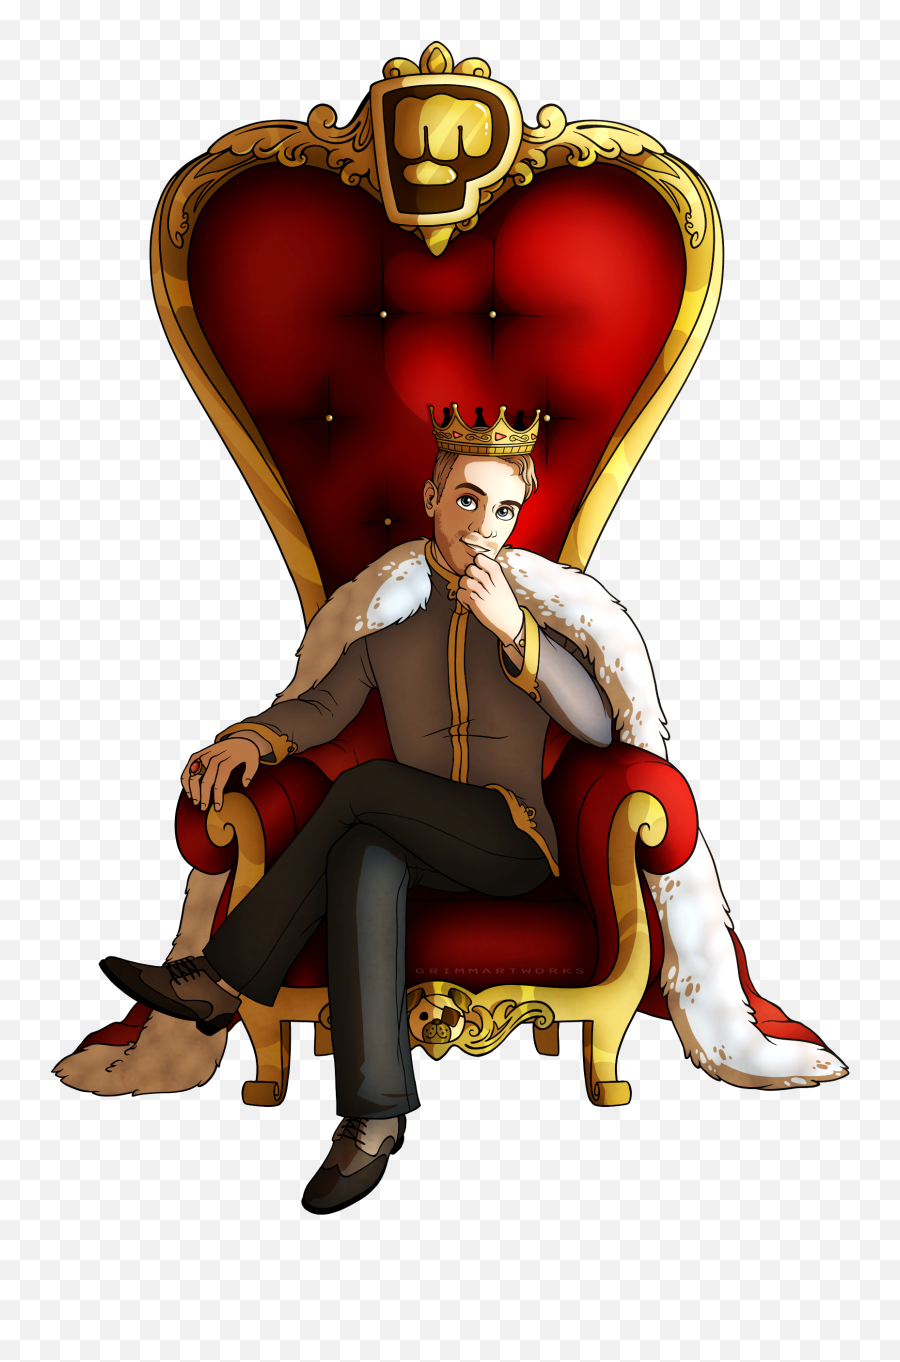 Fanart For The King Of Youtube No Not Jake Paul - Jake Paul Fanart Png,Jake Paul Png